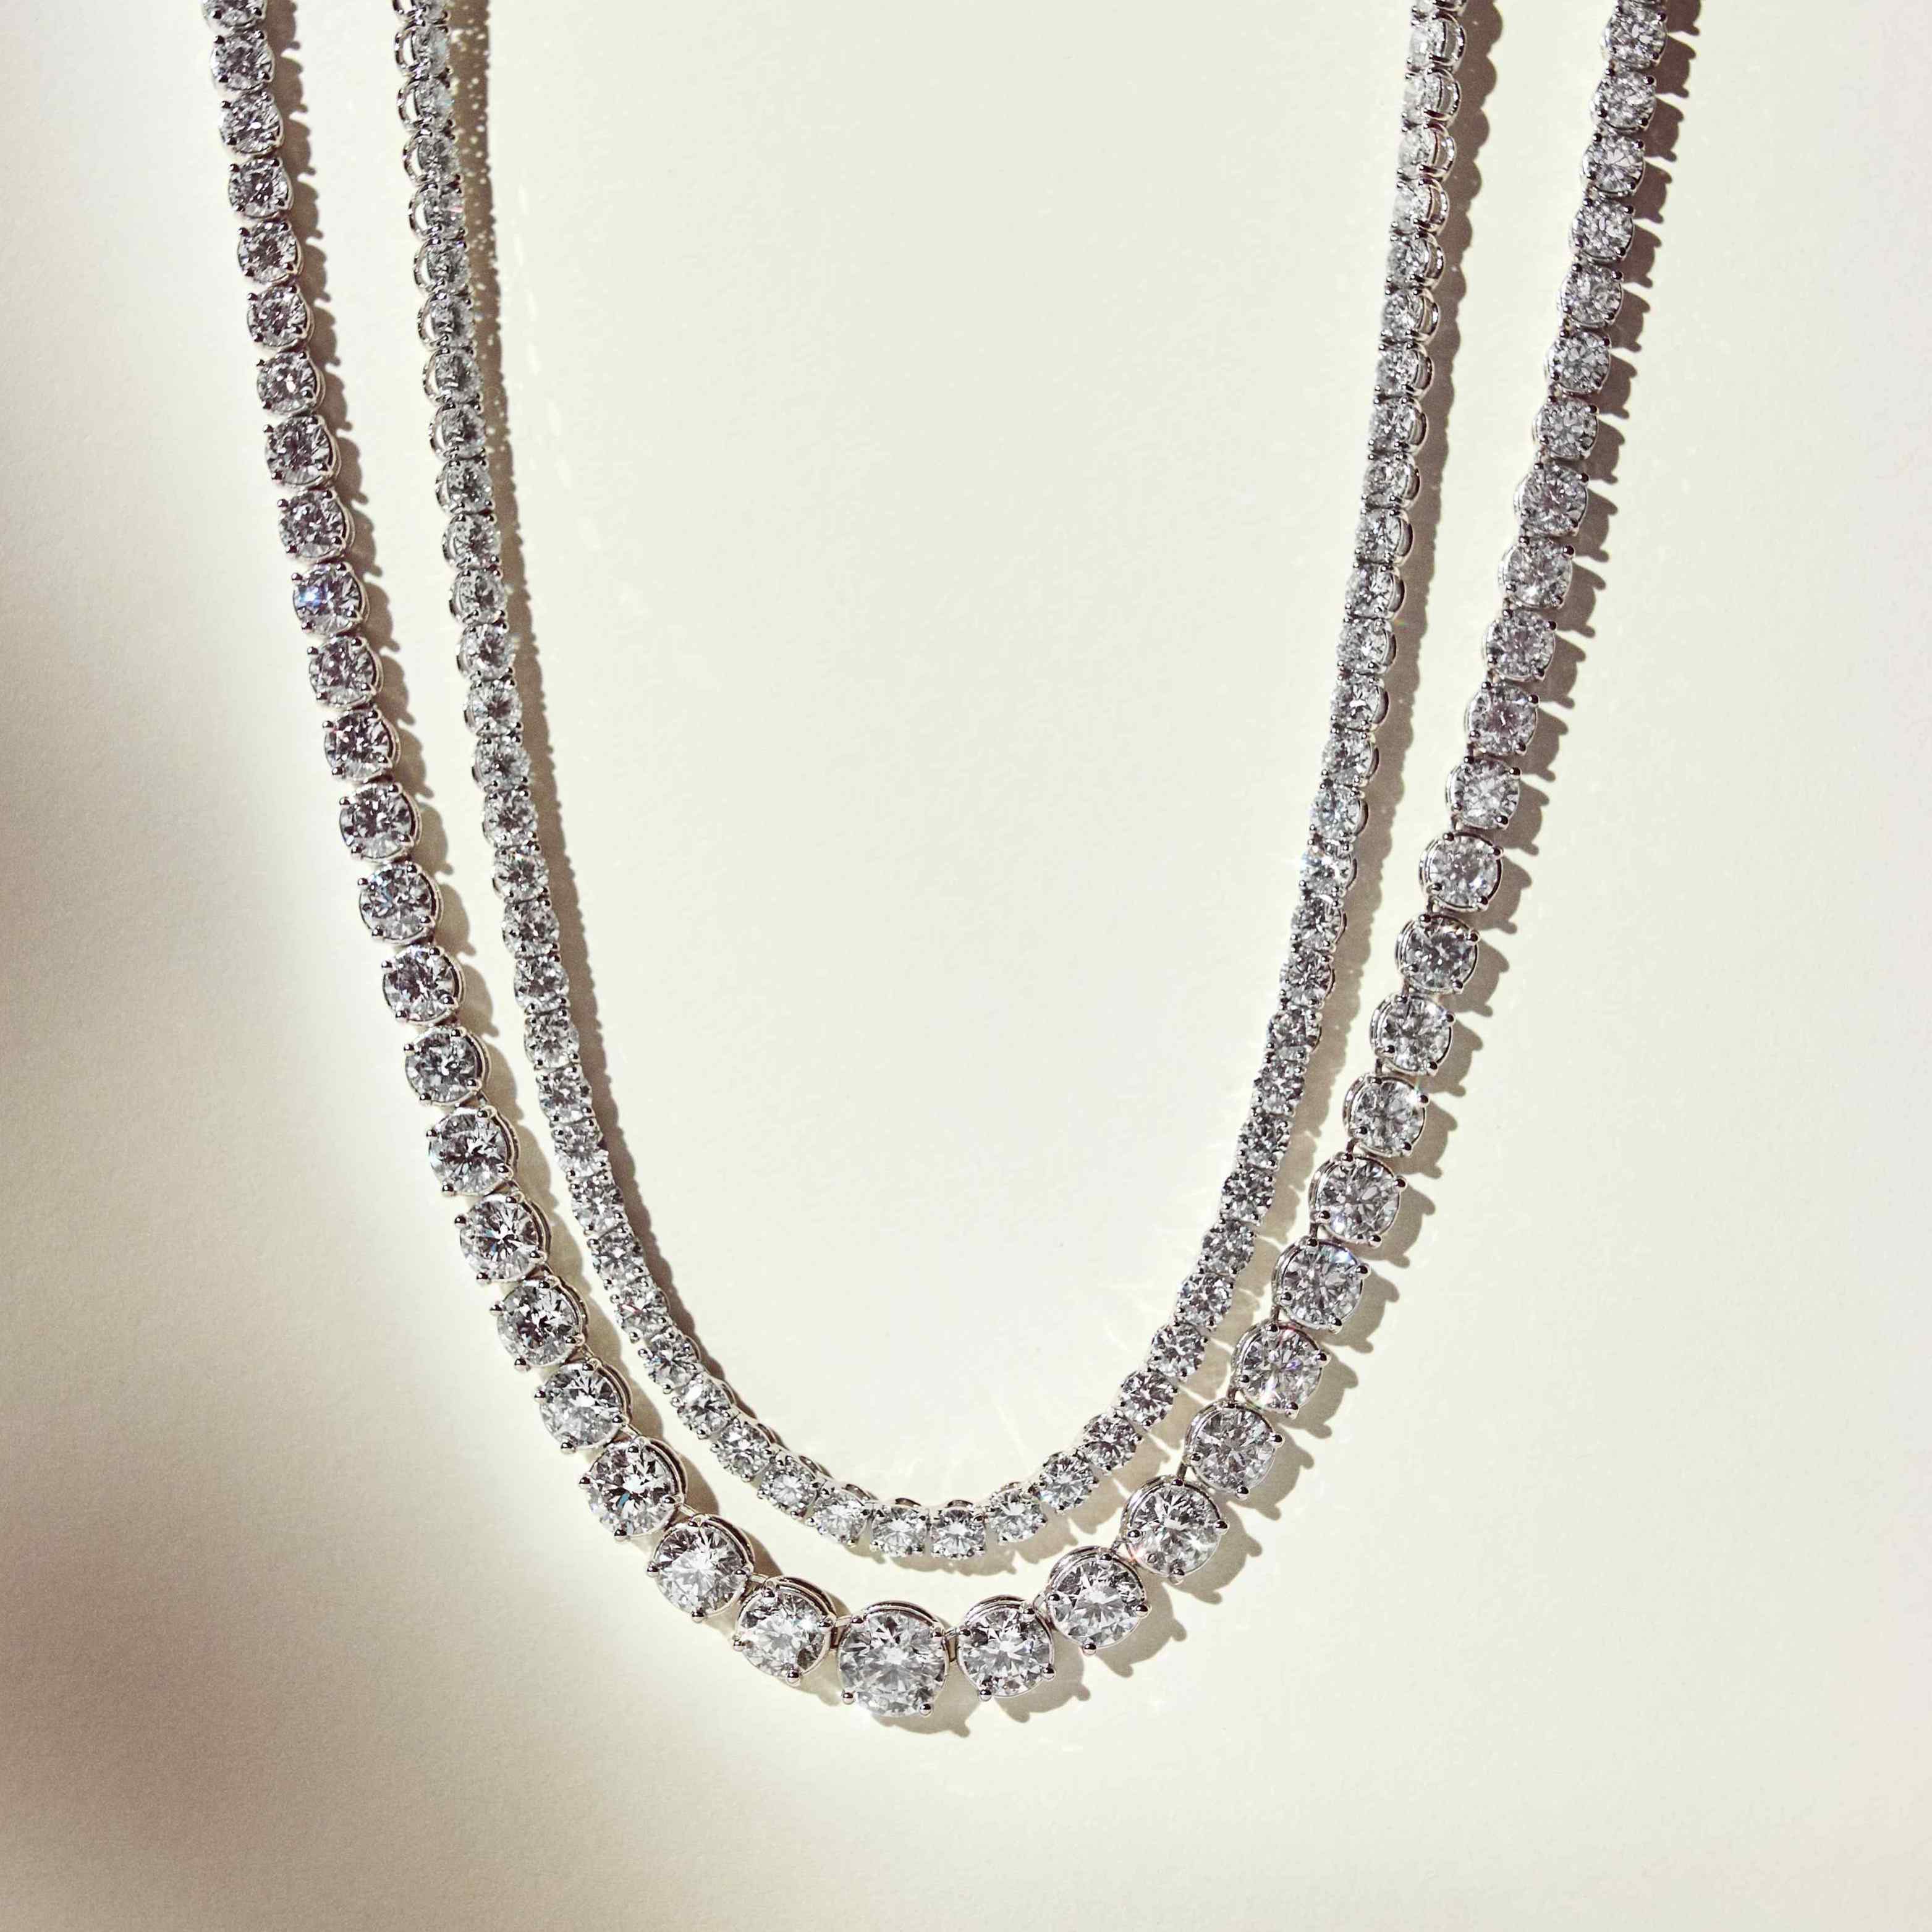 The Collier Rivière is a 25ct graduated diamond tennis necklace that features flawless round brilliants in a four prong solitaire setting. Paired here with the Collier de Diamants - our uniform tennis necklace, for the ultimate stack. D-color, IF/VVS diamonds crescendo toward a center diamond of 1ct. The length of this striking piece is 16 inches (40cm).